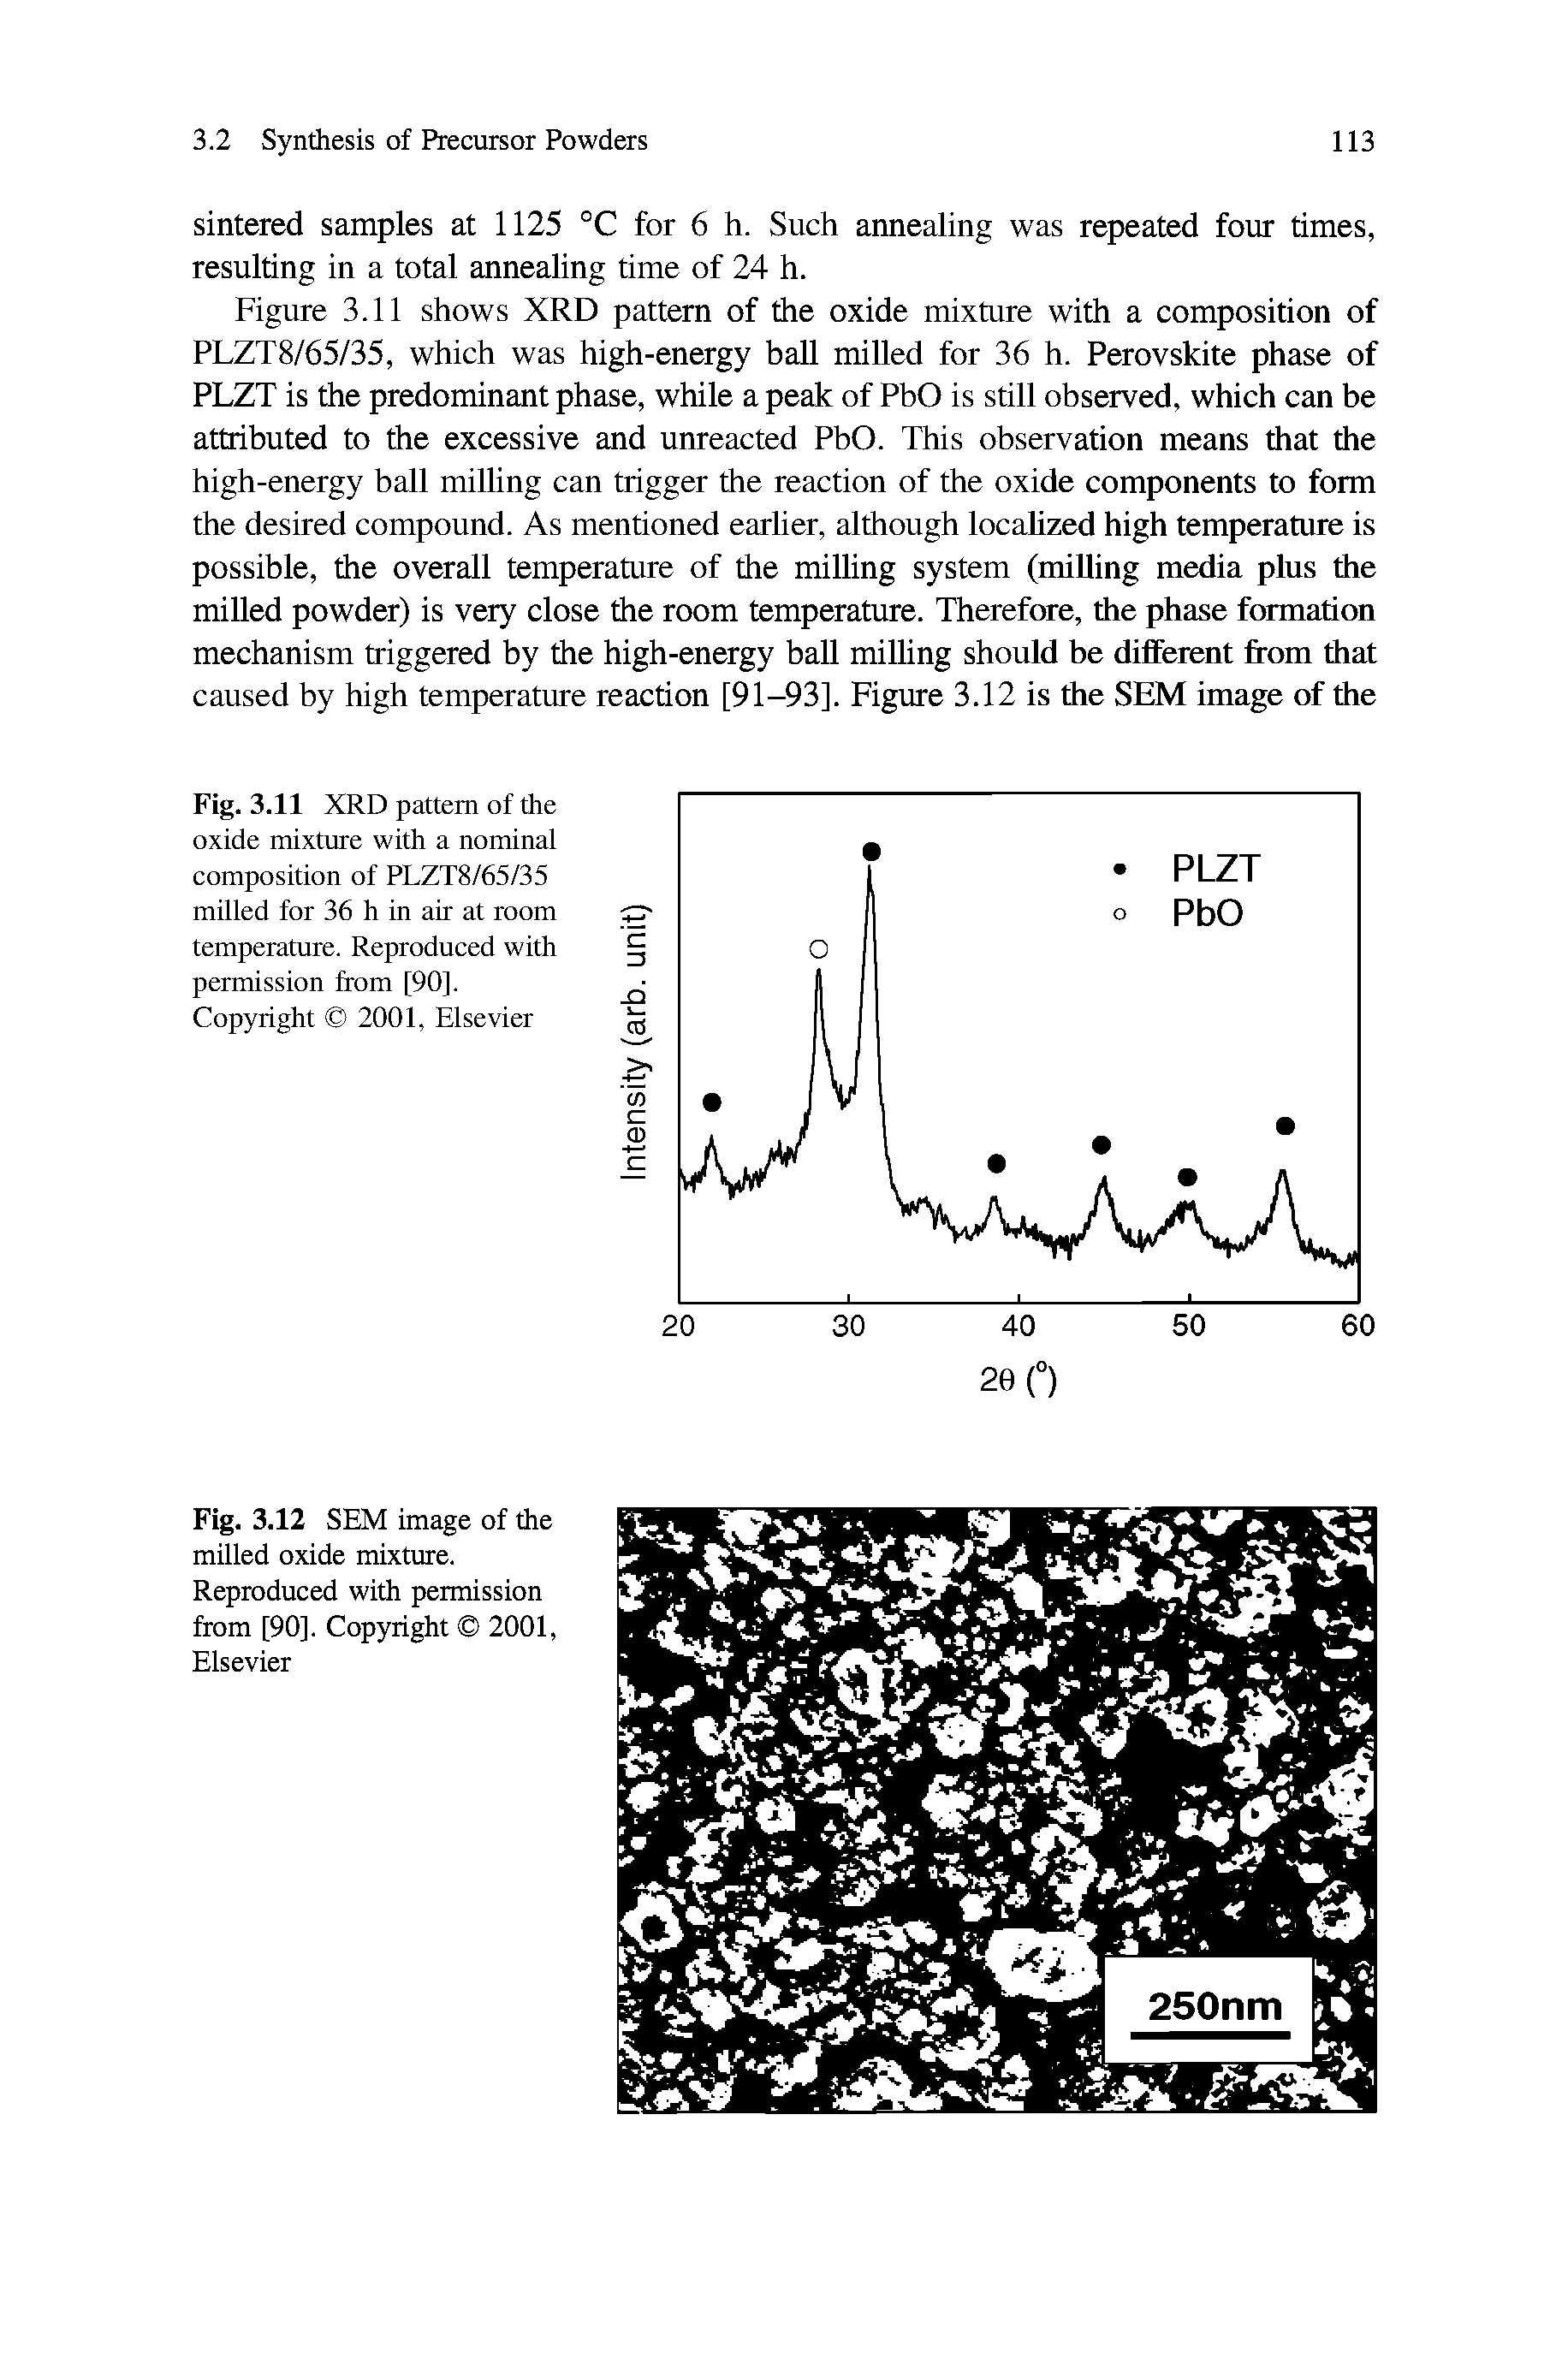 Fig. 3.12 SEM image of the milled oxide mixture. Reproduced with permission fixrm [90]. Copyright 2001, Elsevier...